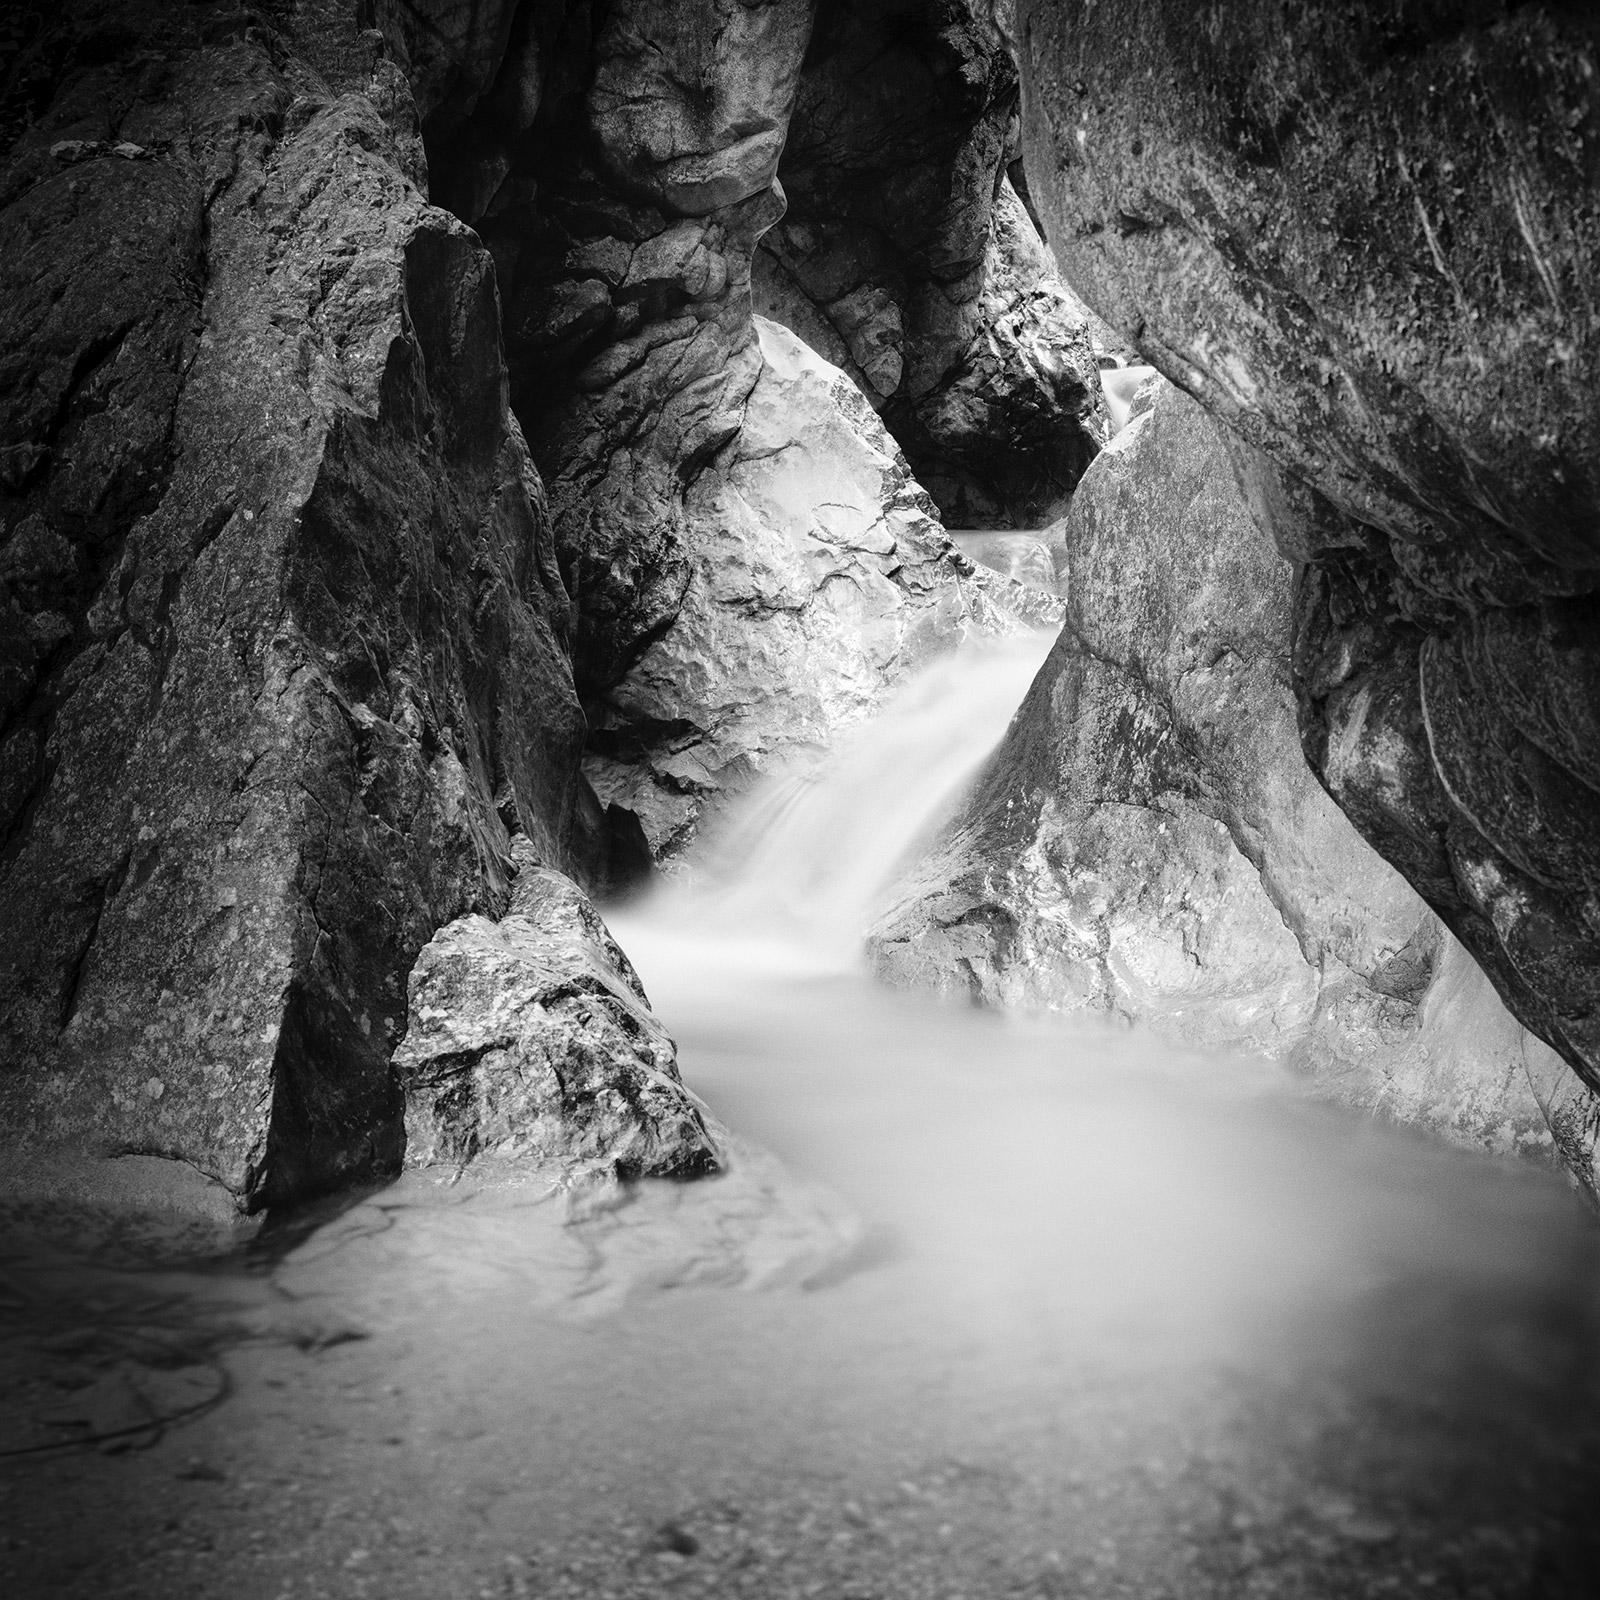 Gerald Berghammer Landscape Photograph - Wild Water Canyon, mountain stream, waterfall, black and white waterscape print